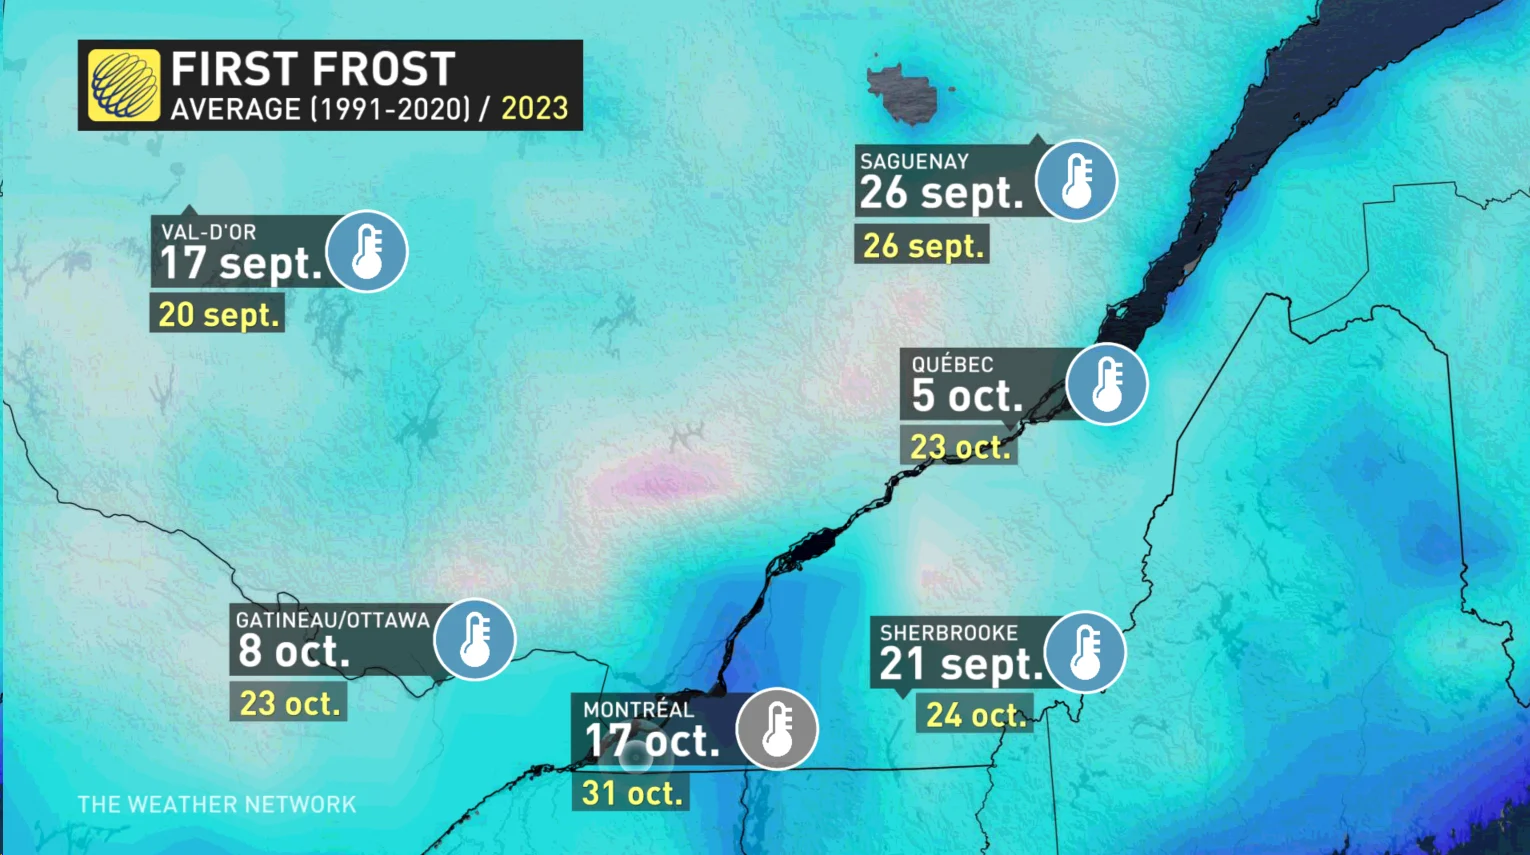 Baron - first frost average - Oct31.jpg